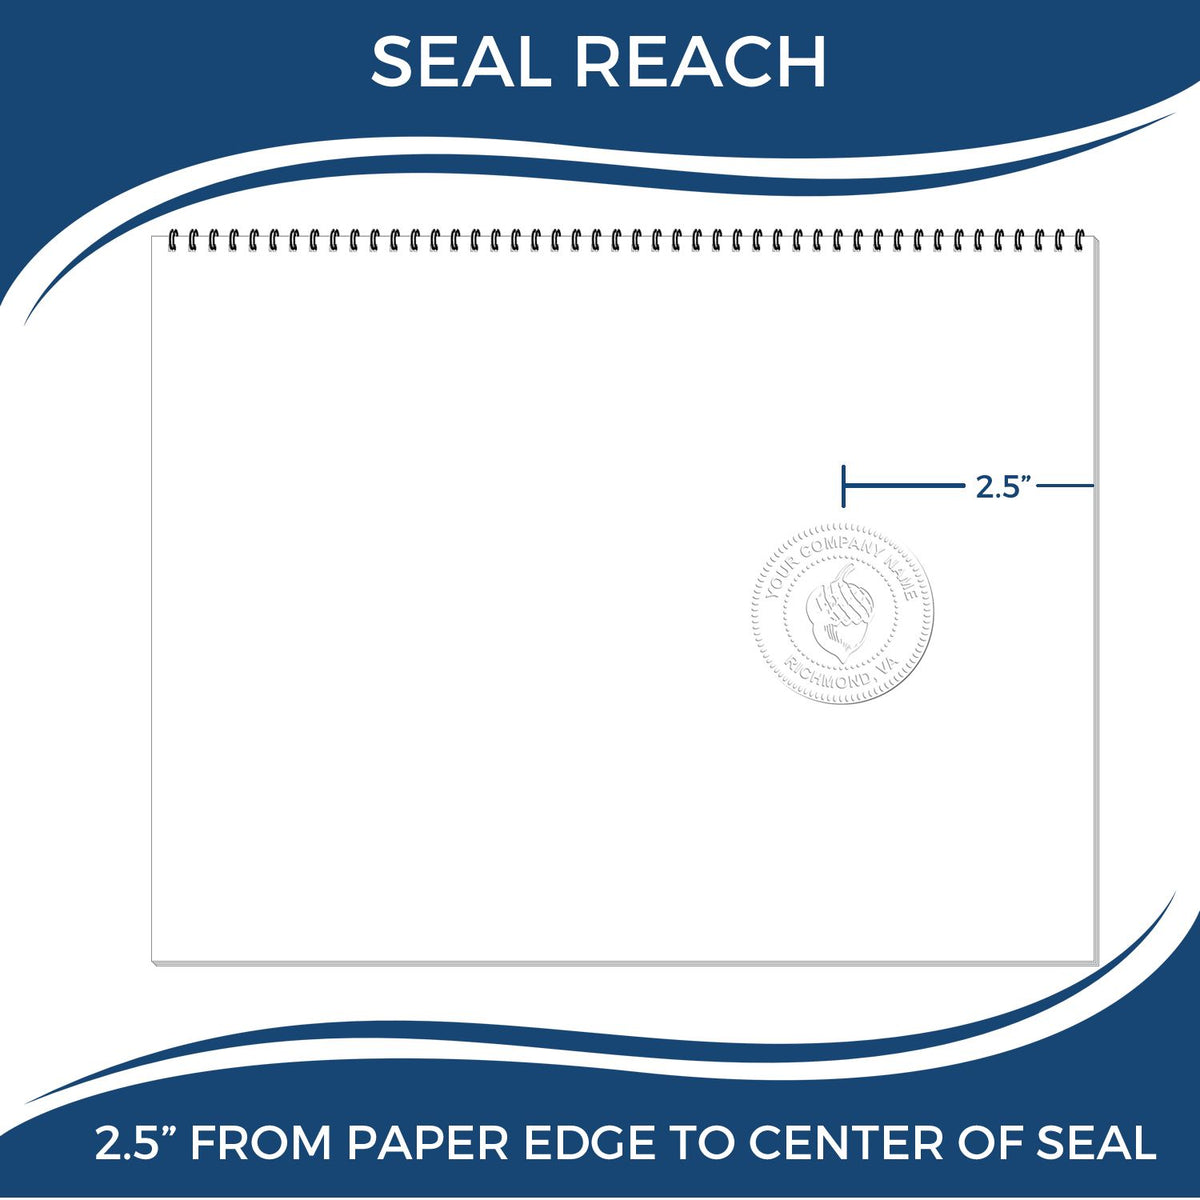 An infographic showing the seal reach which is represented by a ruler and a miniature seal image of the Long Reach New Mexico Geology Seal